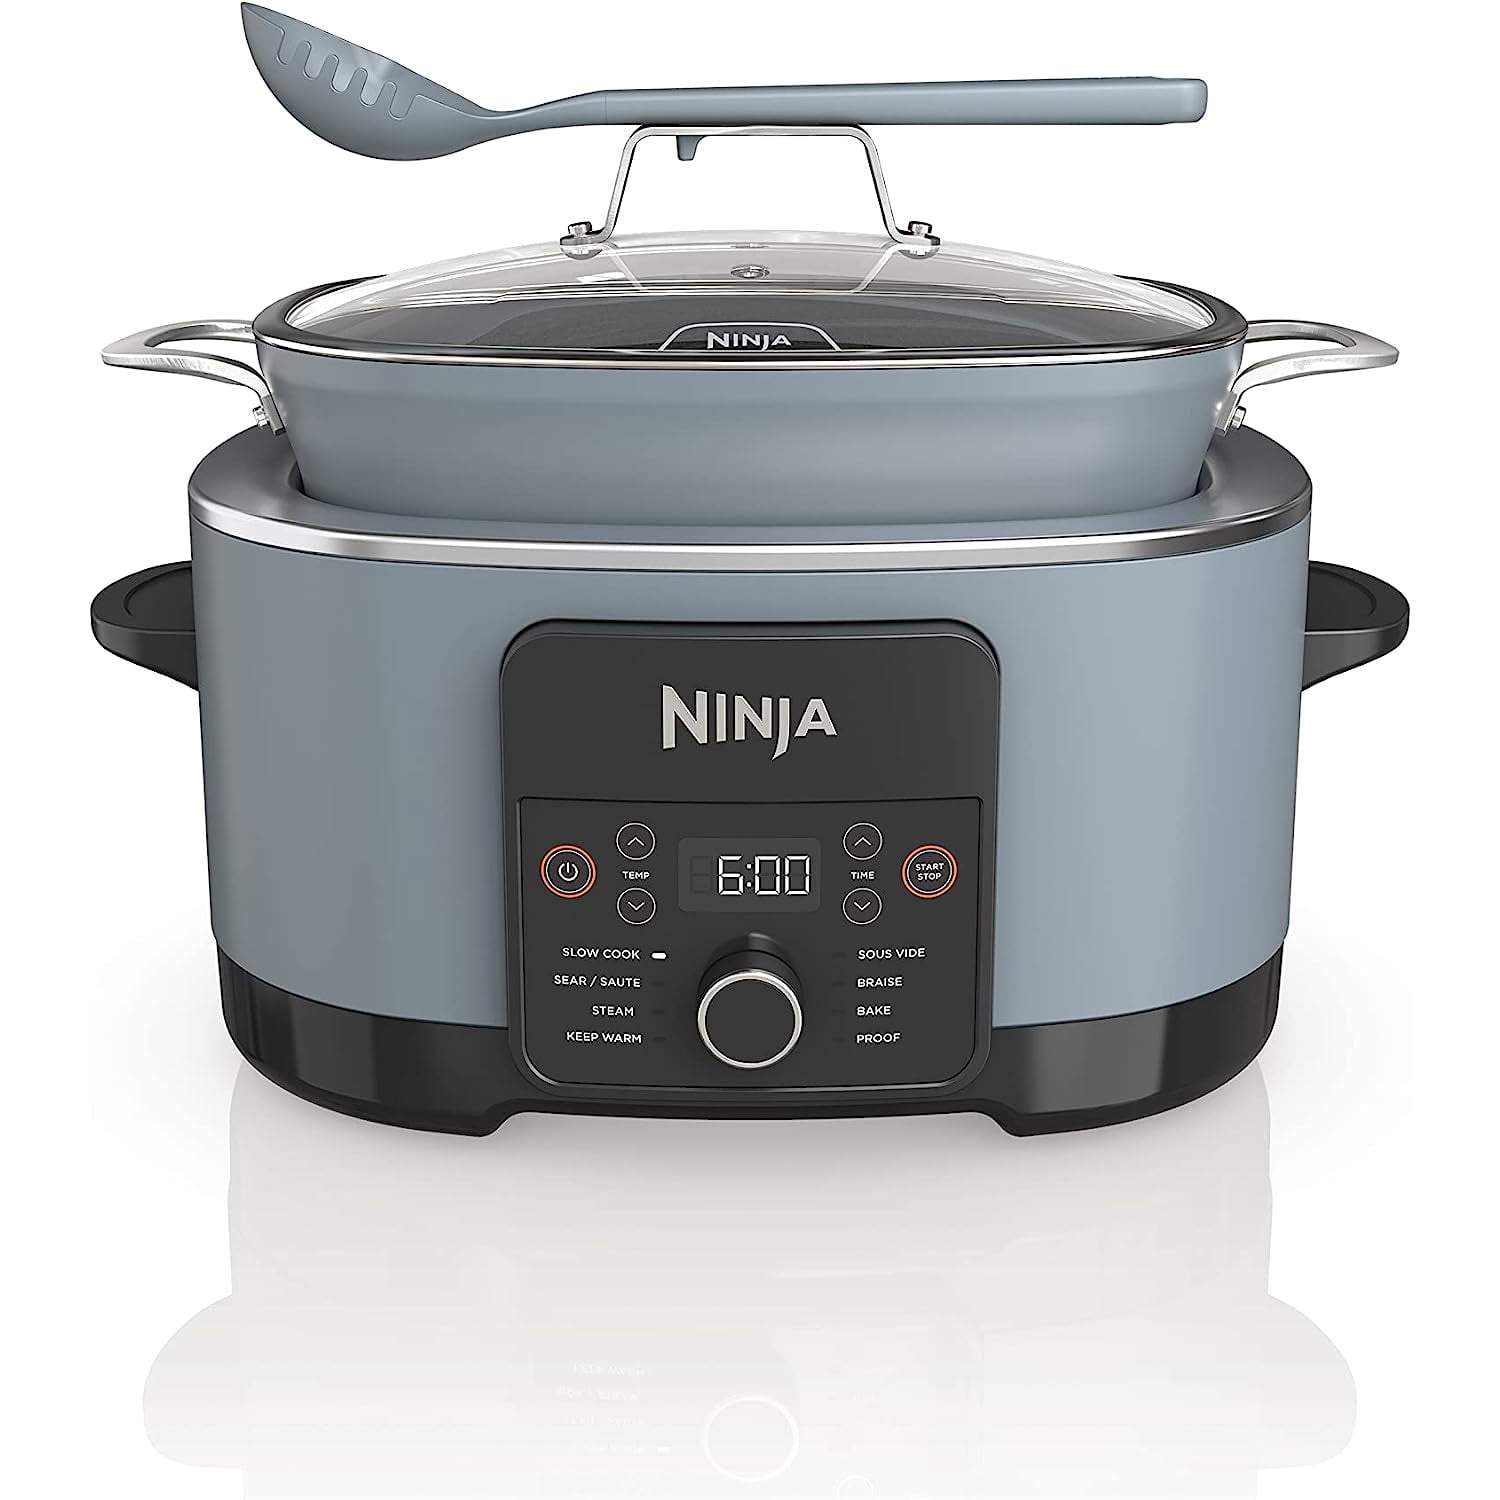 Just when I thought @NinjaKitchen couldn't get any better, they go and, ninja  combi